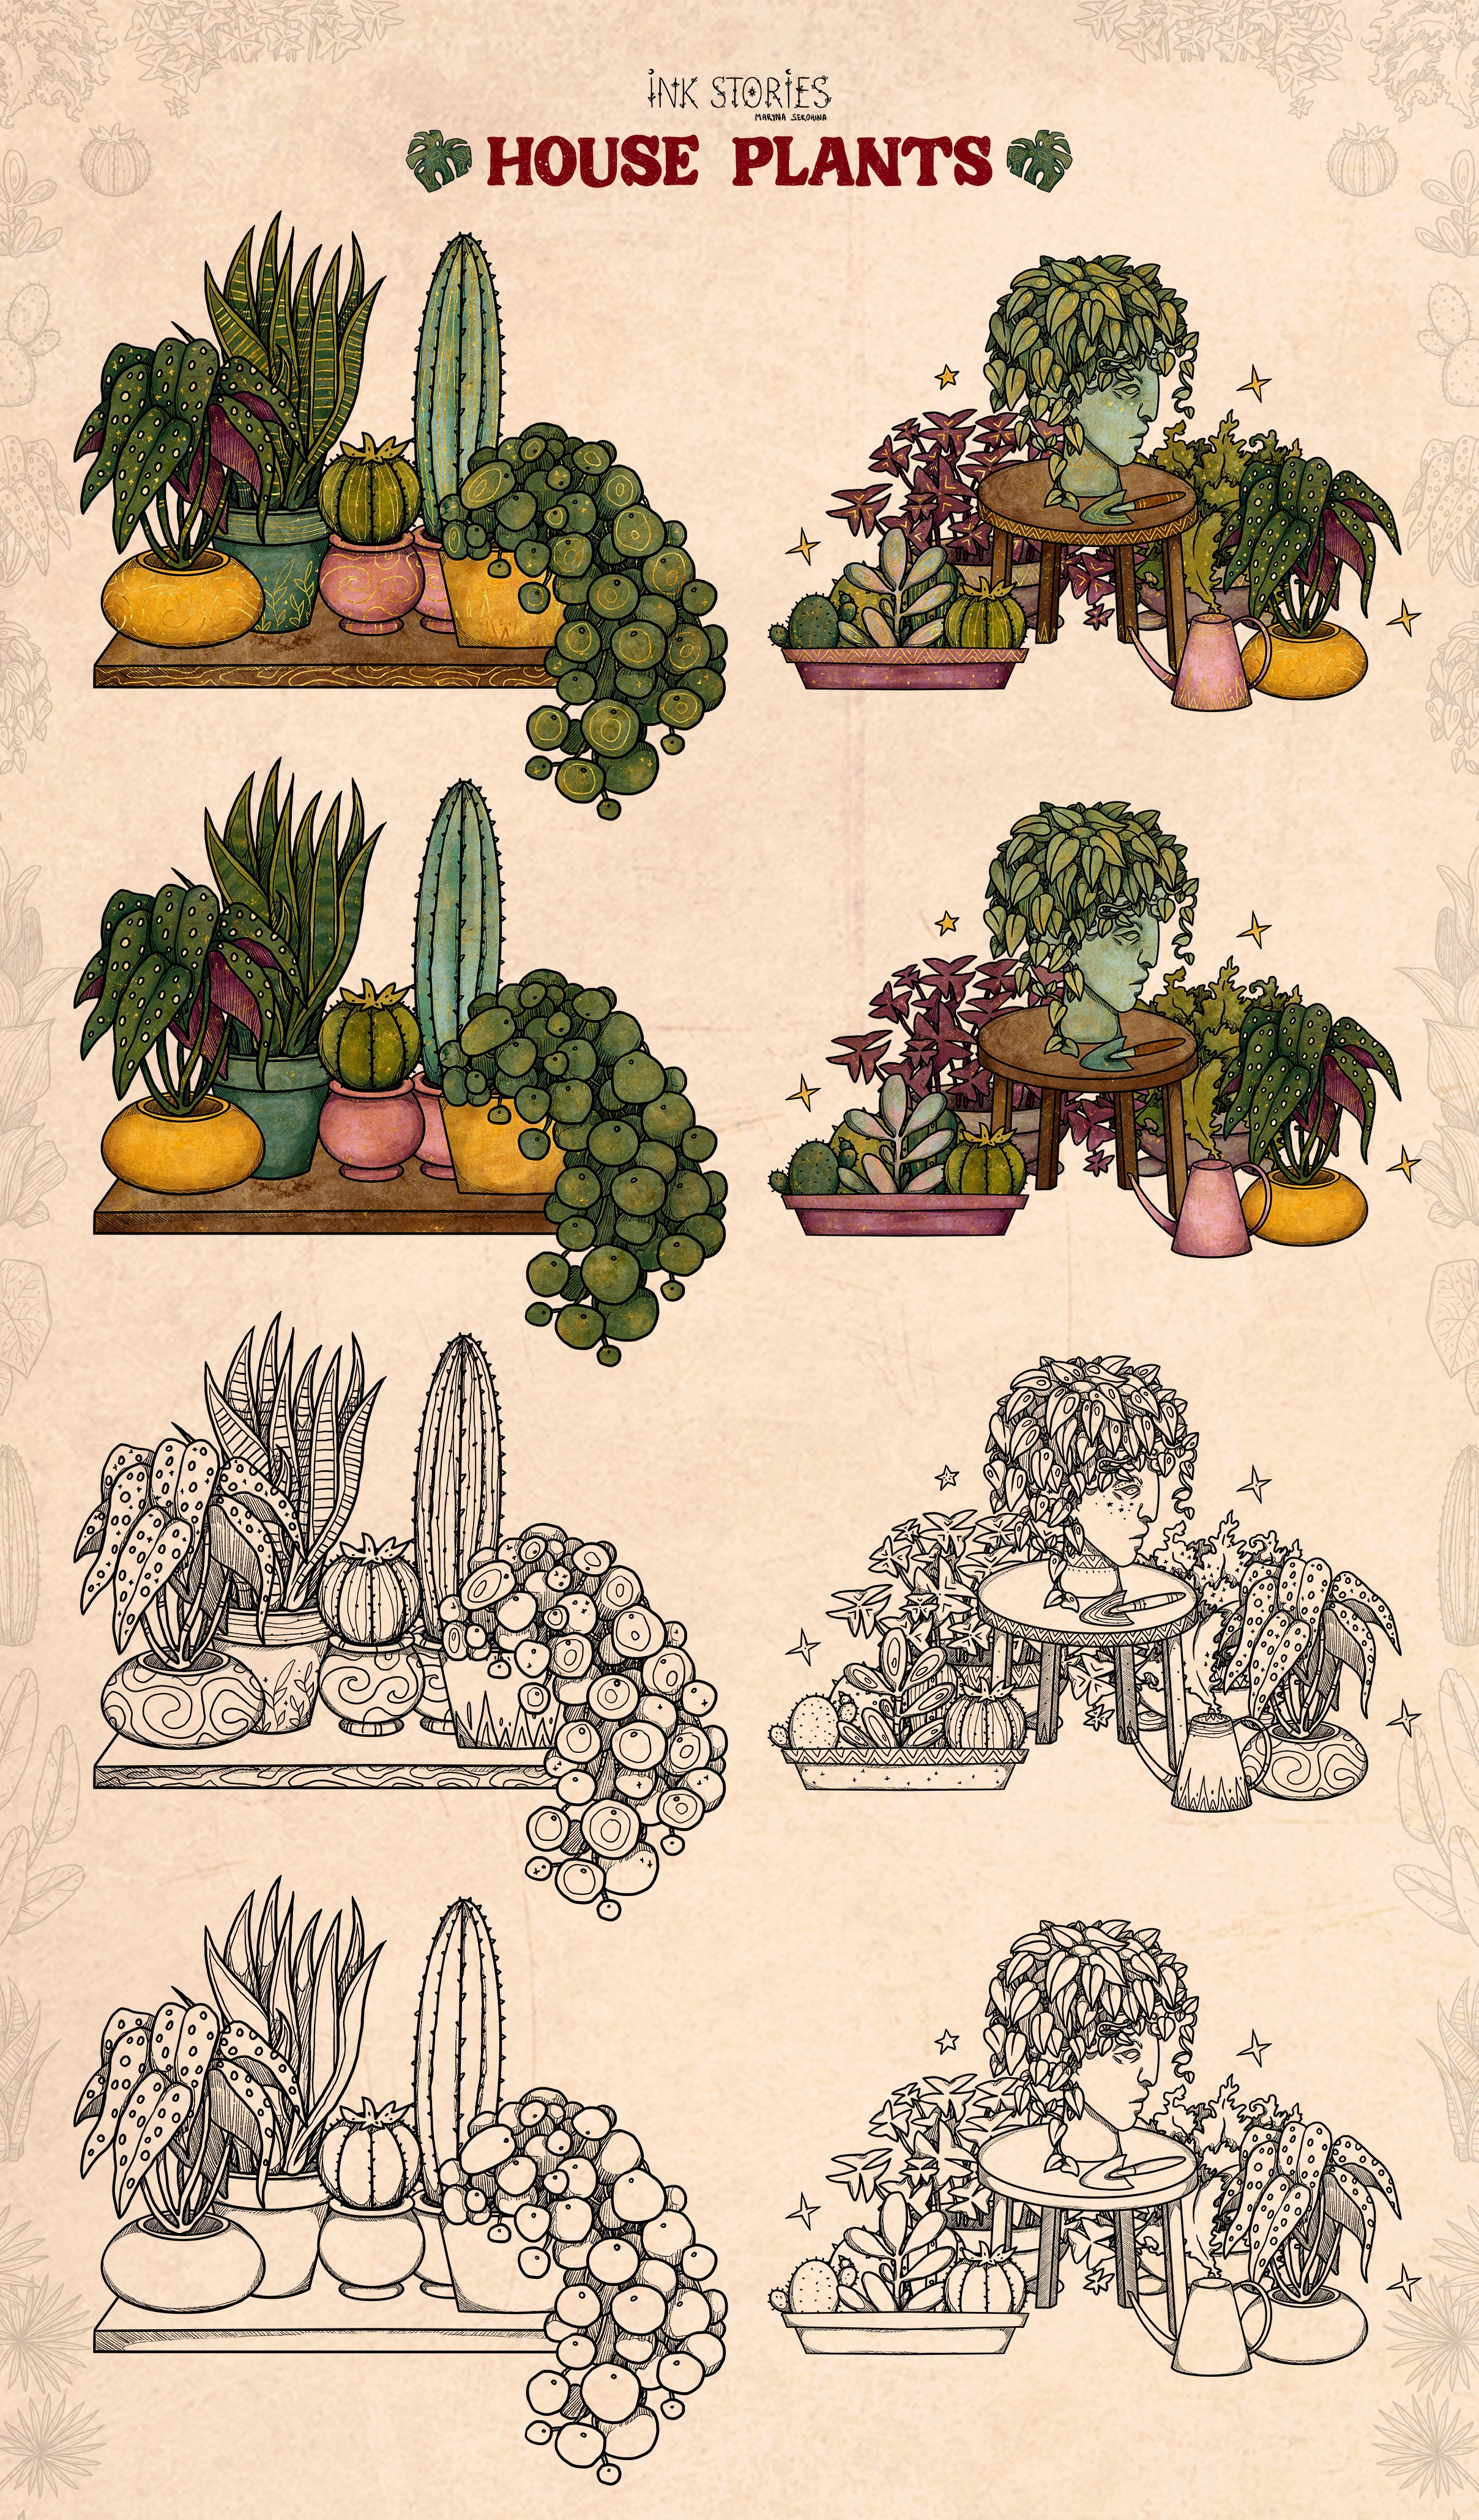 Drawing of a variety of house plants.